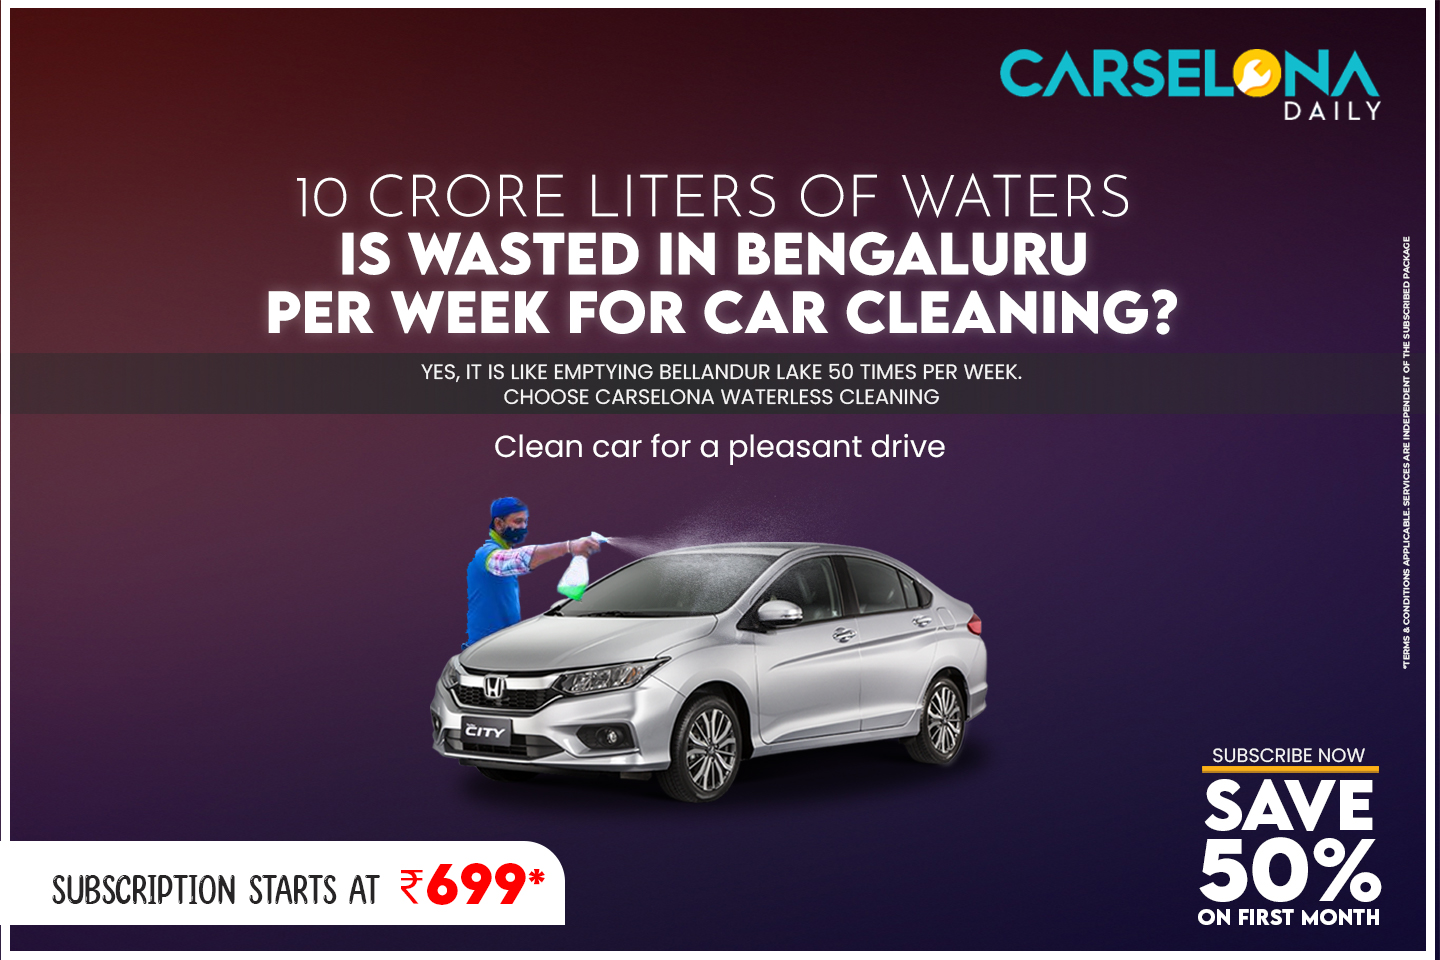 Carselona car cleaning subscription starting at inr 699